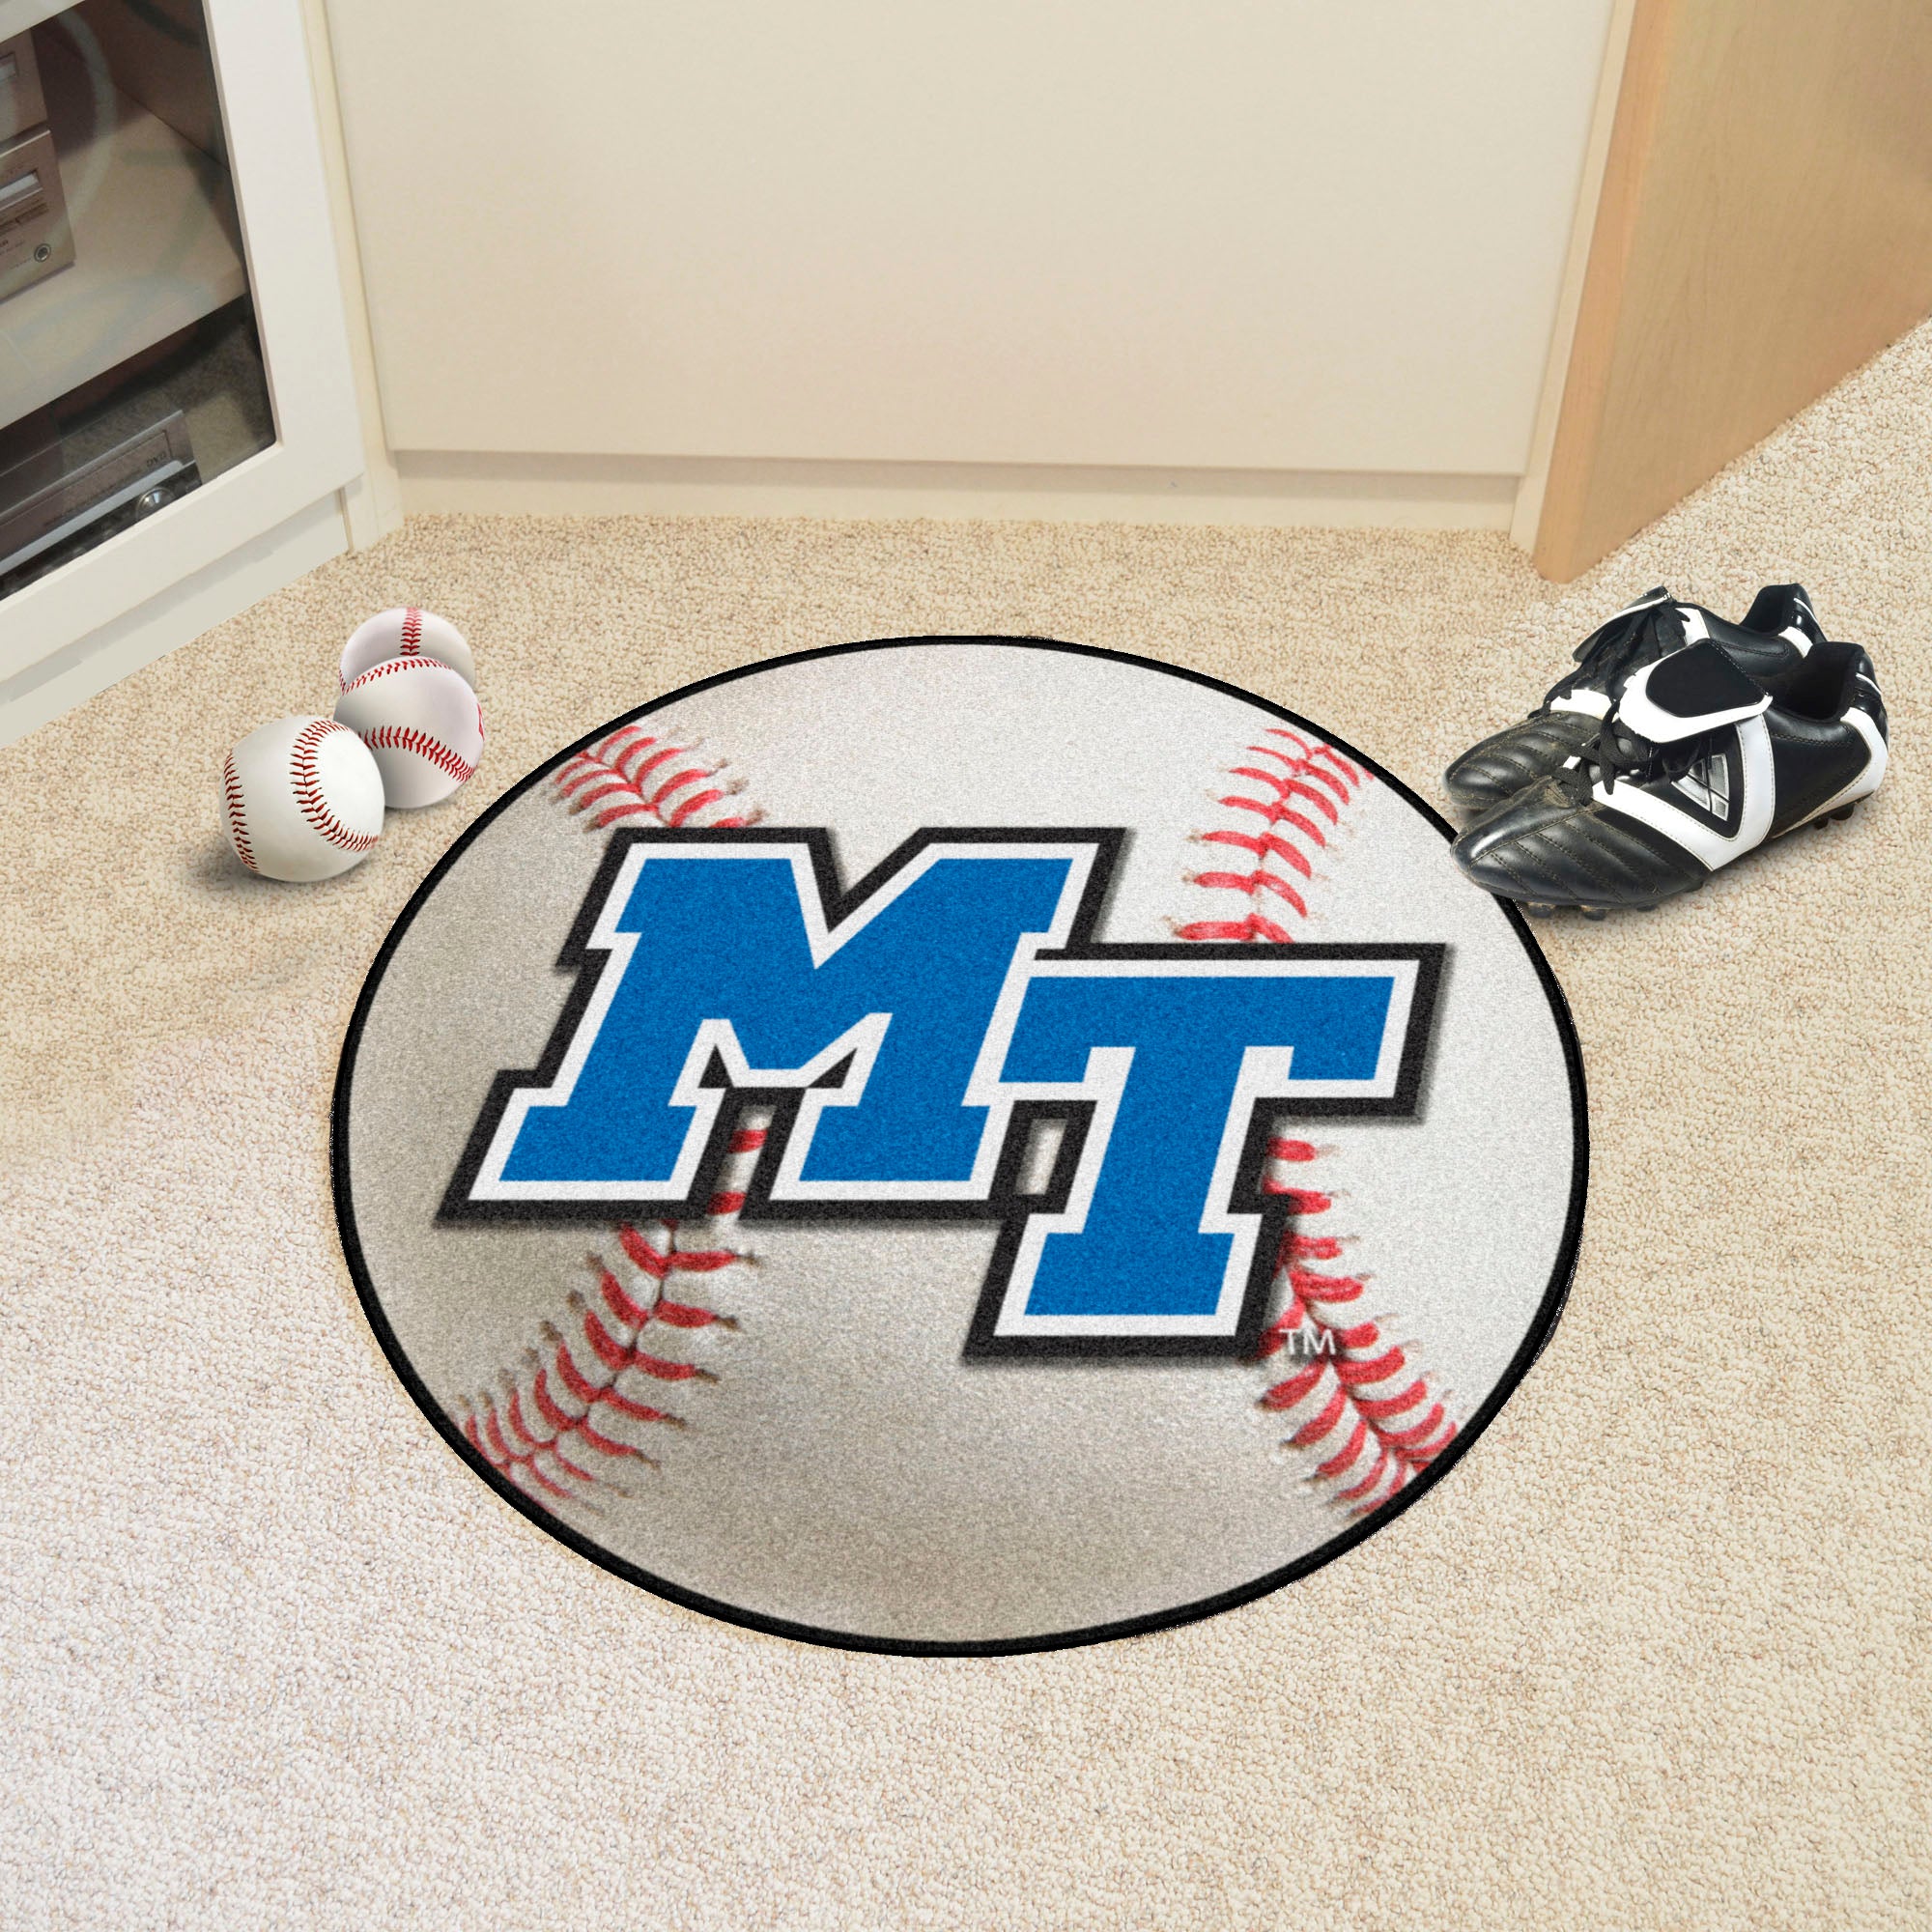 FANMATS, Middle Tennessee State University Baseball Rug - 27in. Diameter